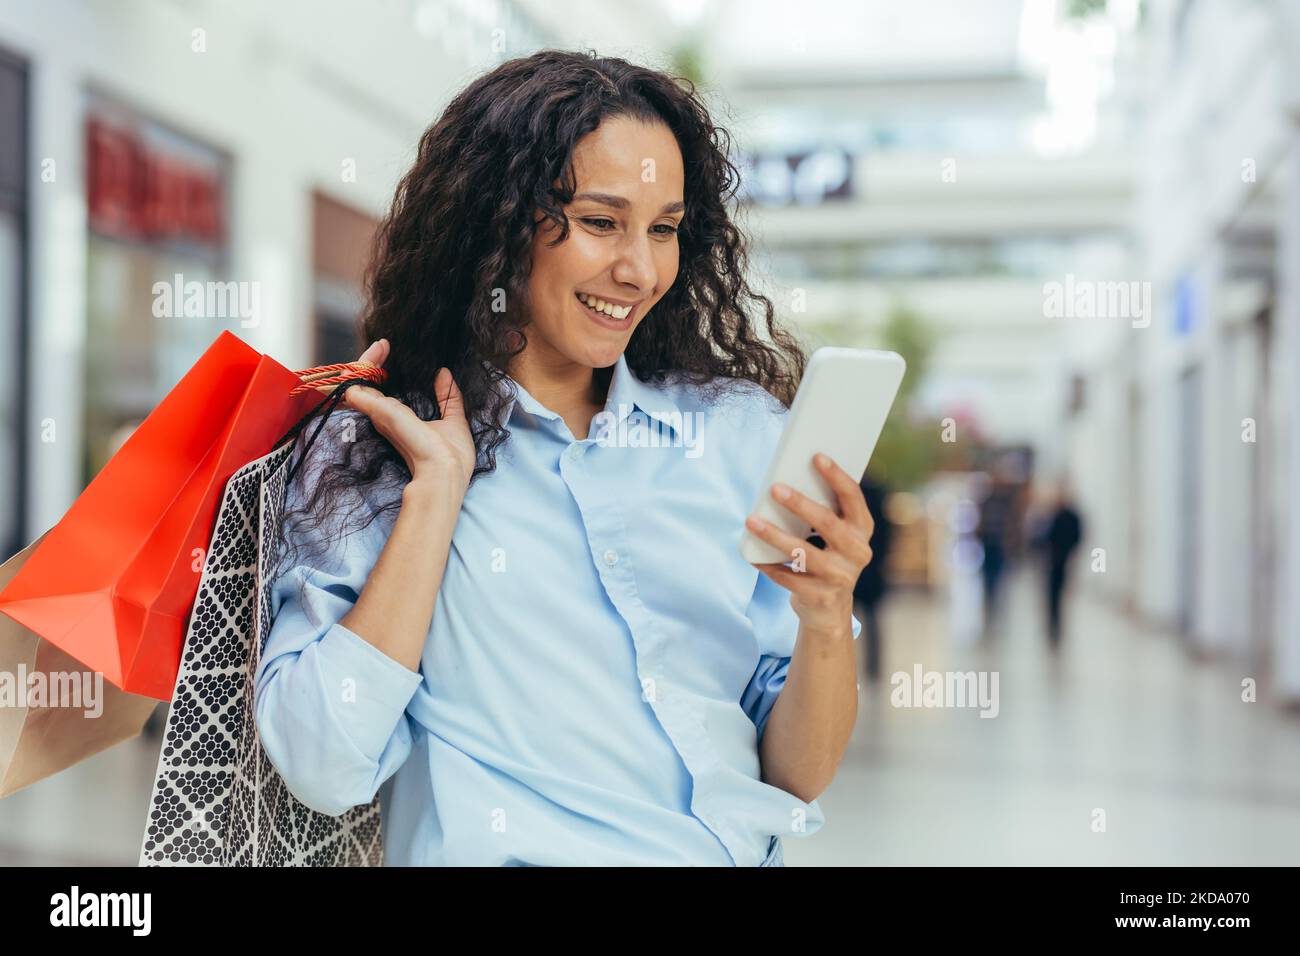 Happy and successful woman shopping for clothes in a supermarket store, Hispanic woman holding a smartphone reading online messages and browsing offers with discounts and sales Stock Photo